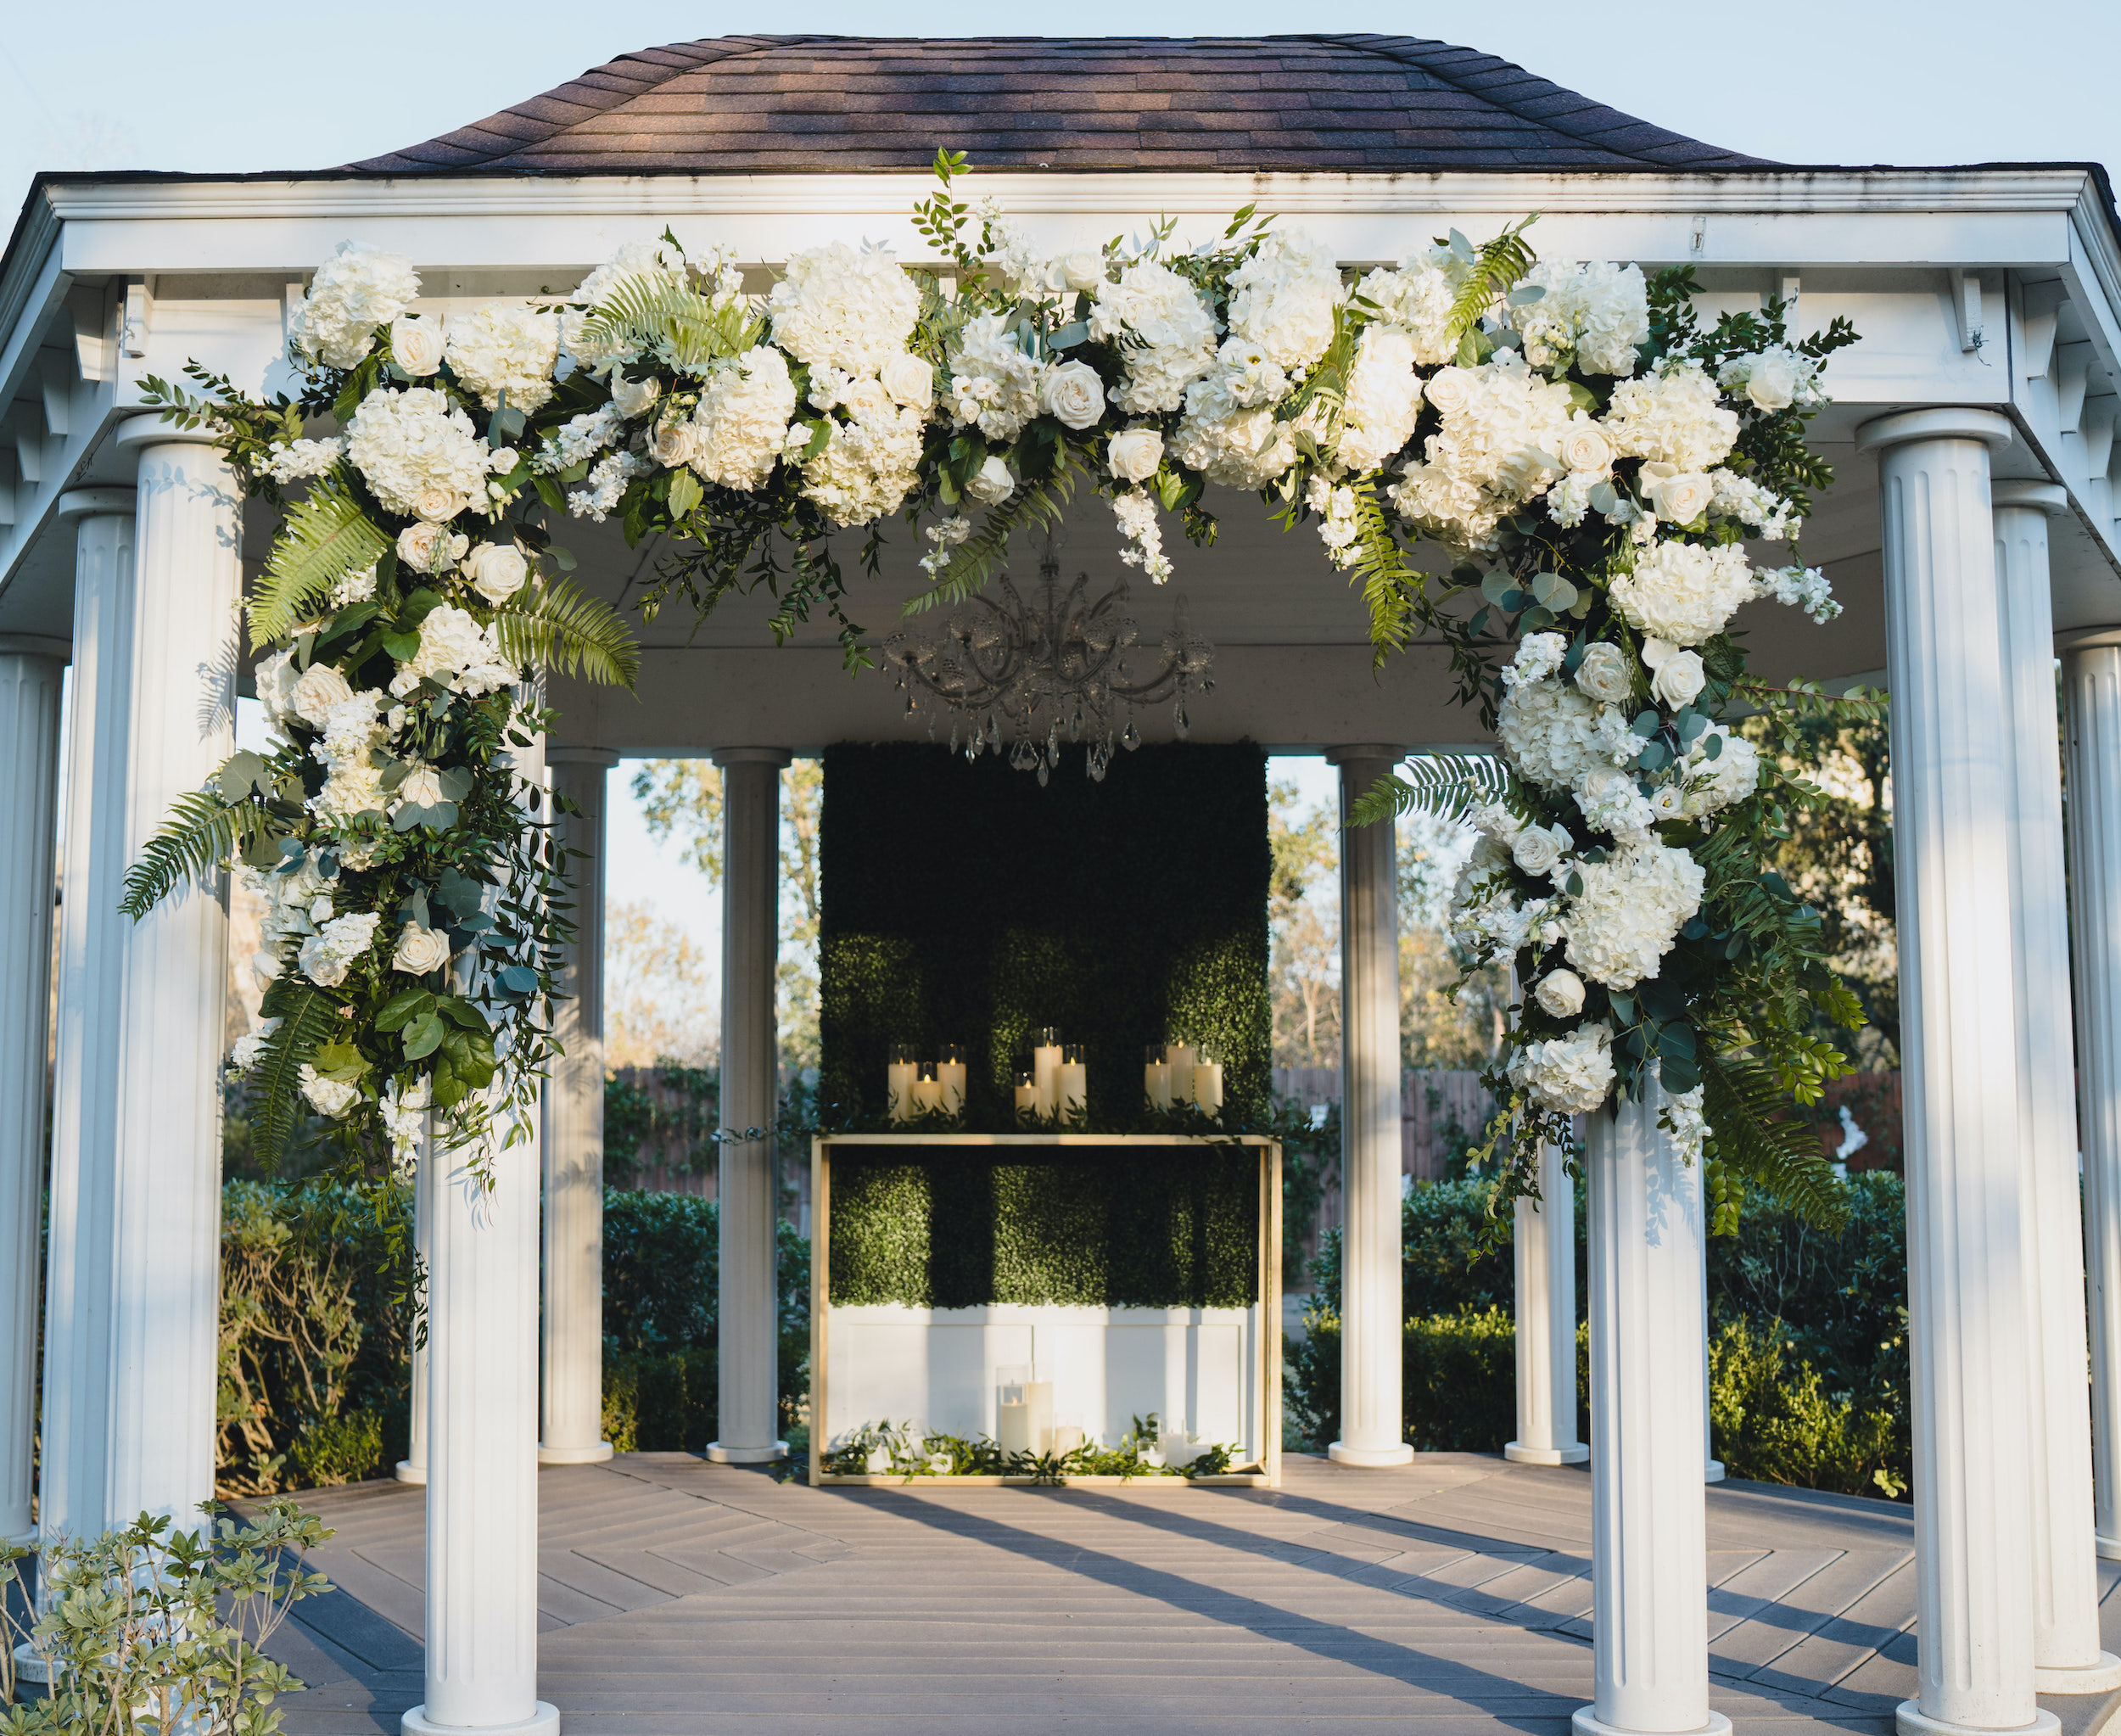 An outdoor wedding ceremony at The Wynden in Houston, TX where Jordan Kimball got married.